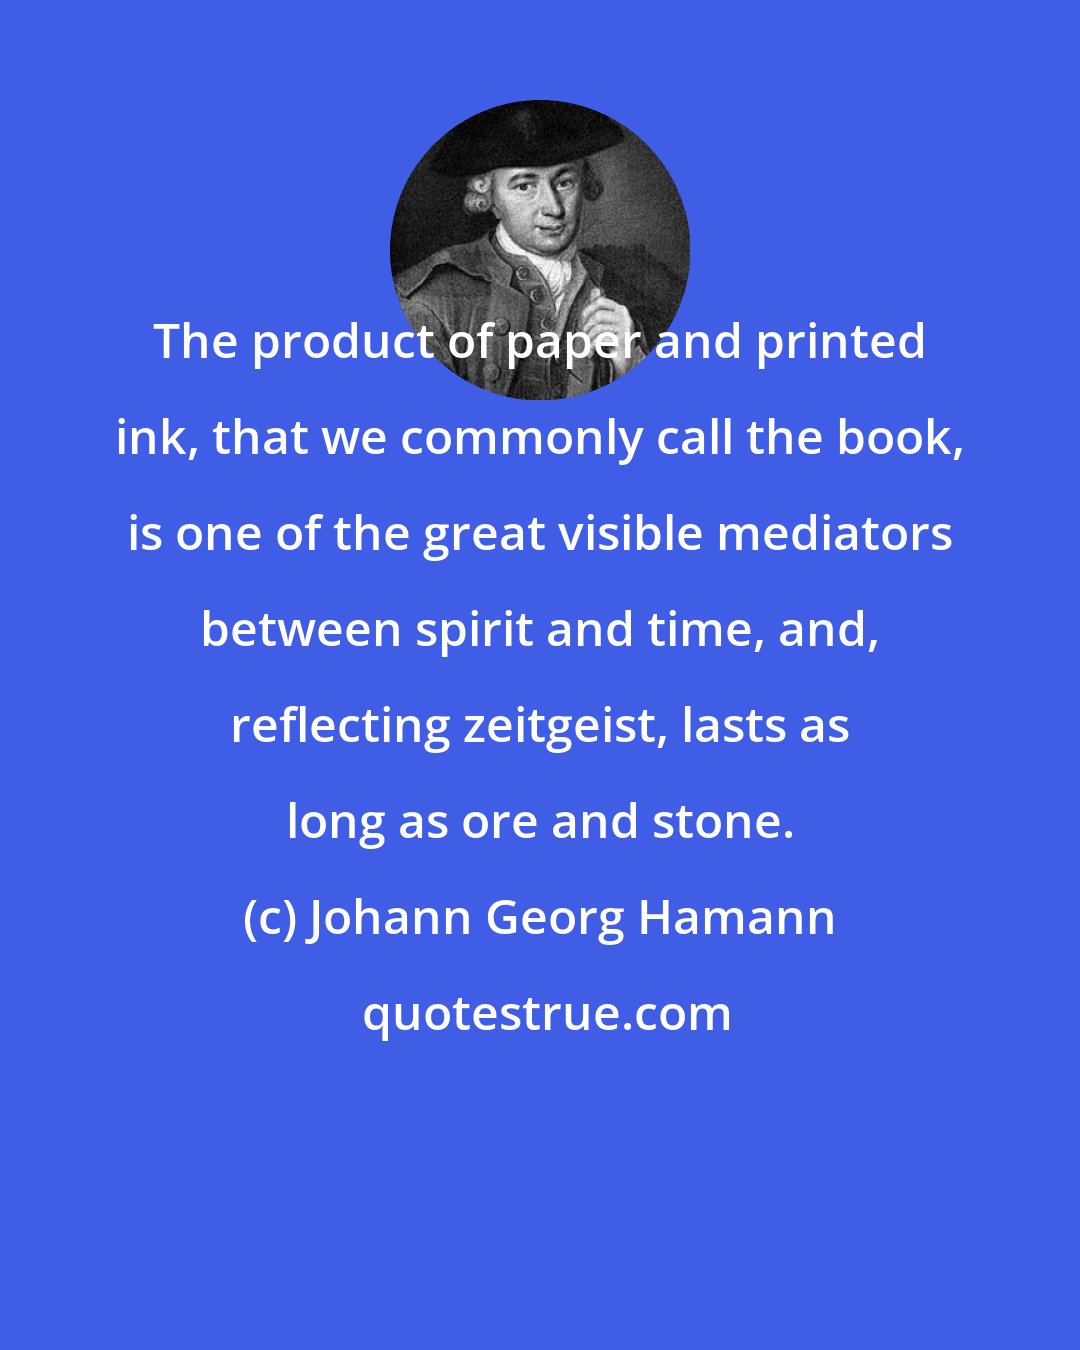 Johann Georg Hamann: The product of paper and printed ink, that we commonly call the book, is one of the great visible mediators between spirit and time, and, reflecting zeitgeist, lasts as long as ore and stone.